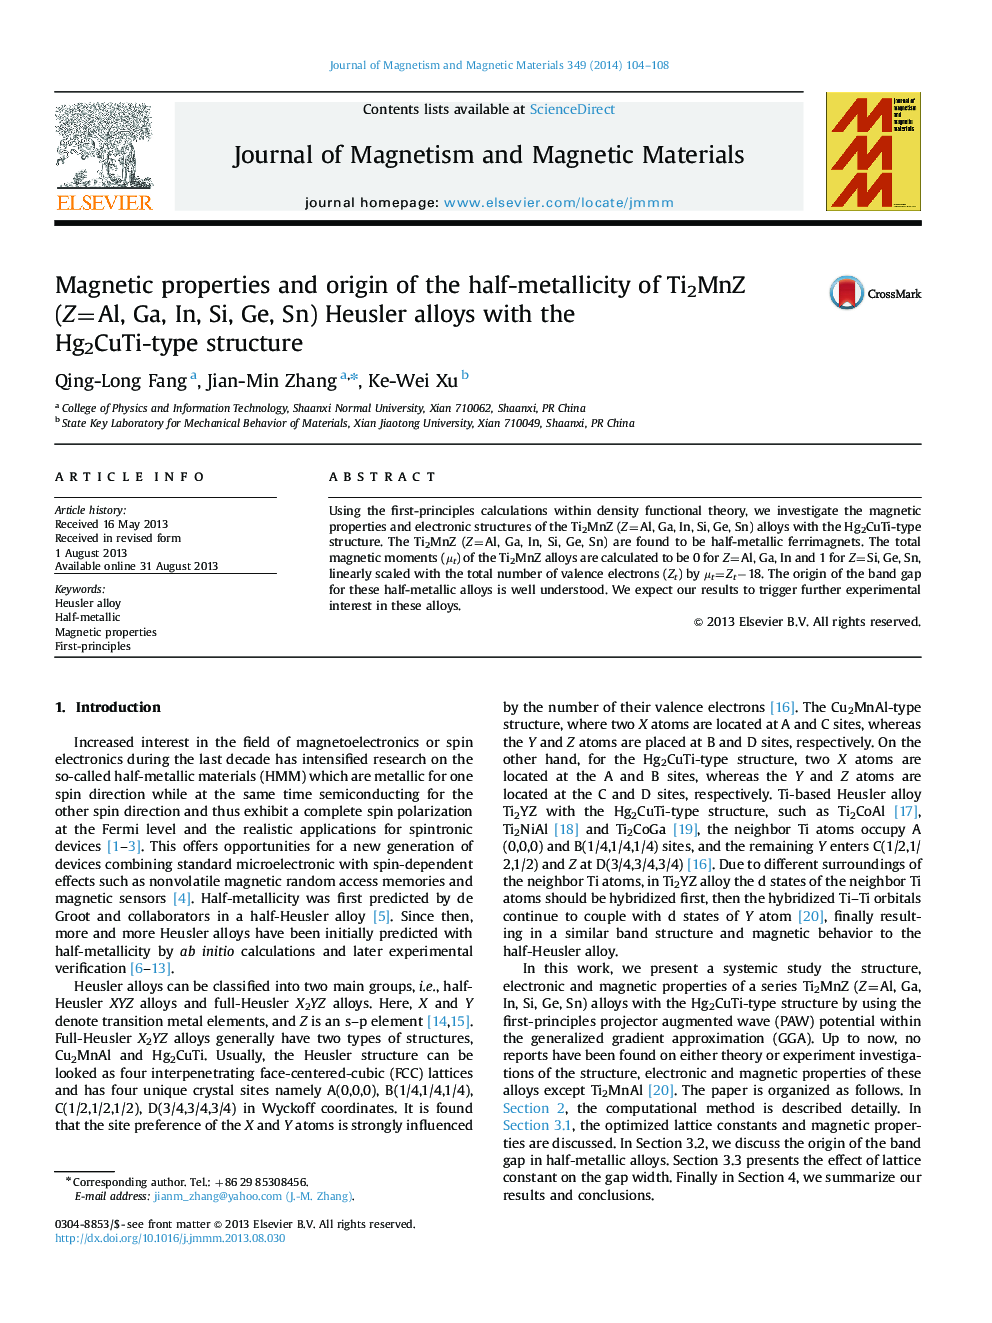 Magnetic properties and origin of the half-metallicity of Ti2MnZ (Z=Al, Ga, In, Si, Ge, Sn) Heusler alloys with the Hg2CuTi-type structure